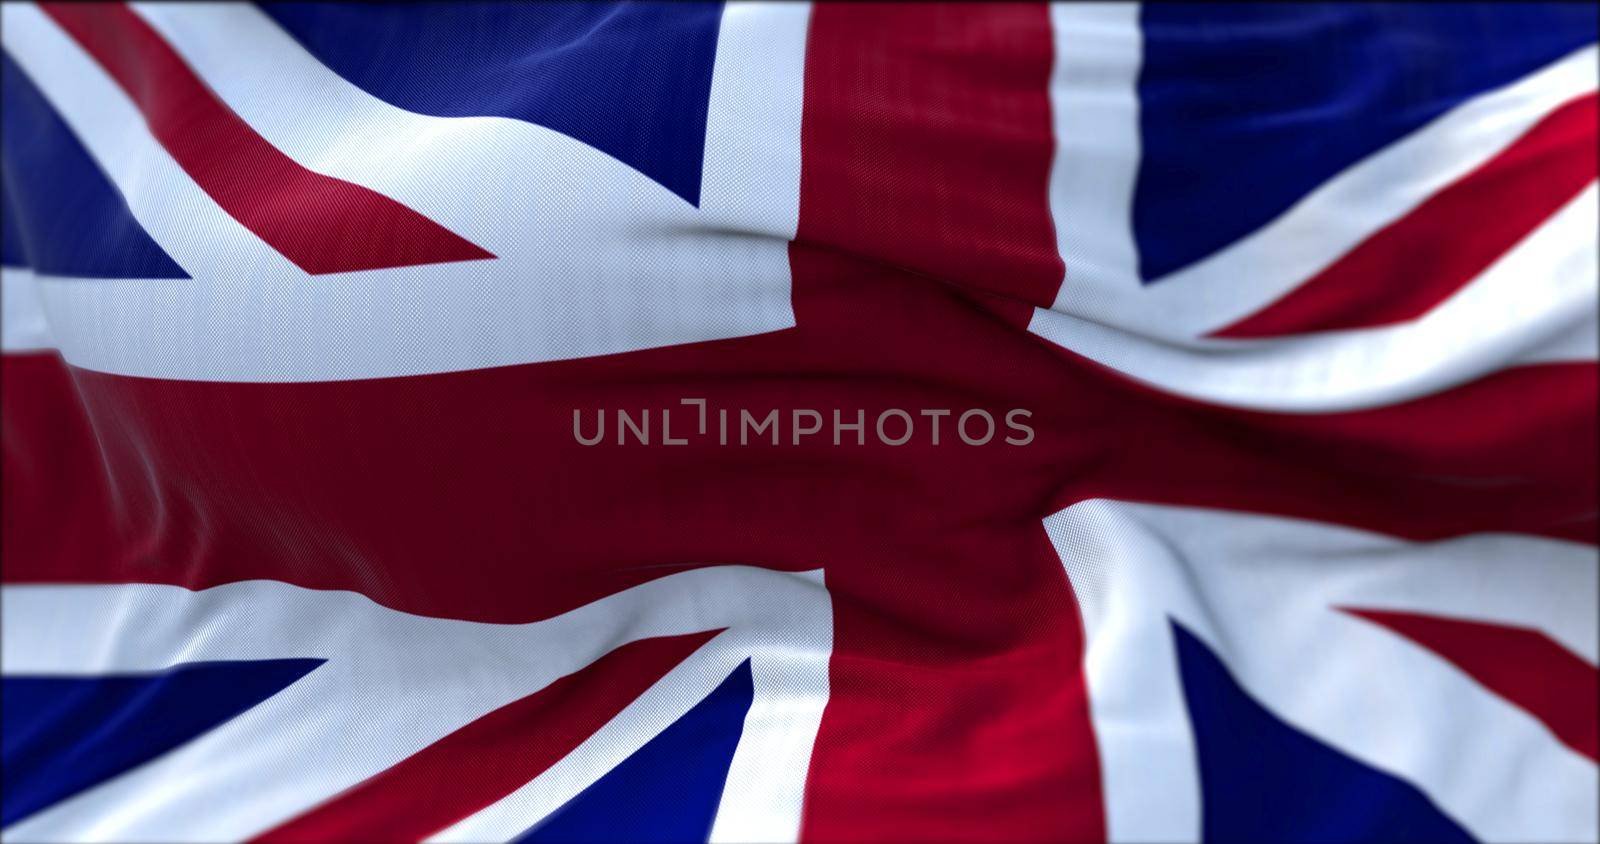 close up view of the United Kingdom flag waving in the wind by rarrarorro